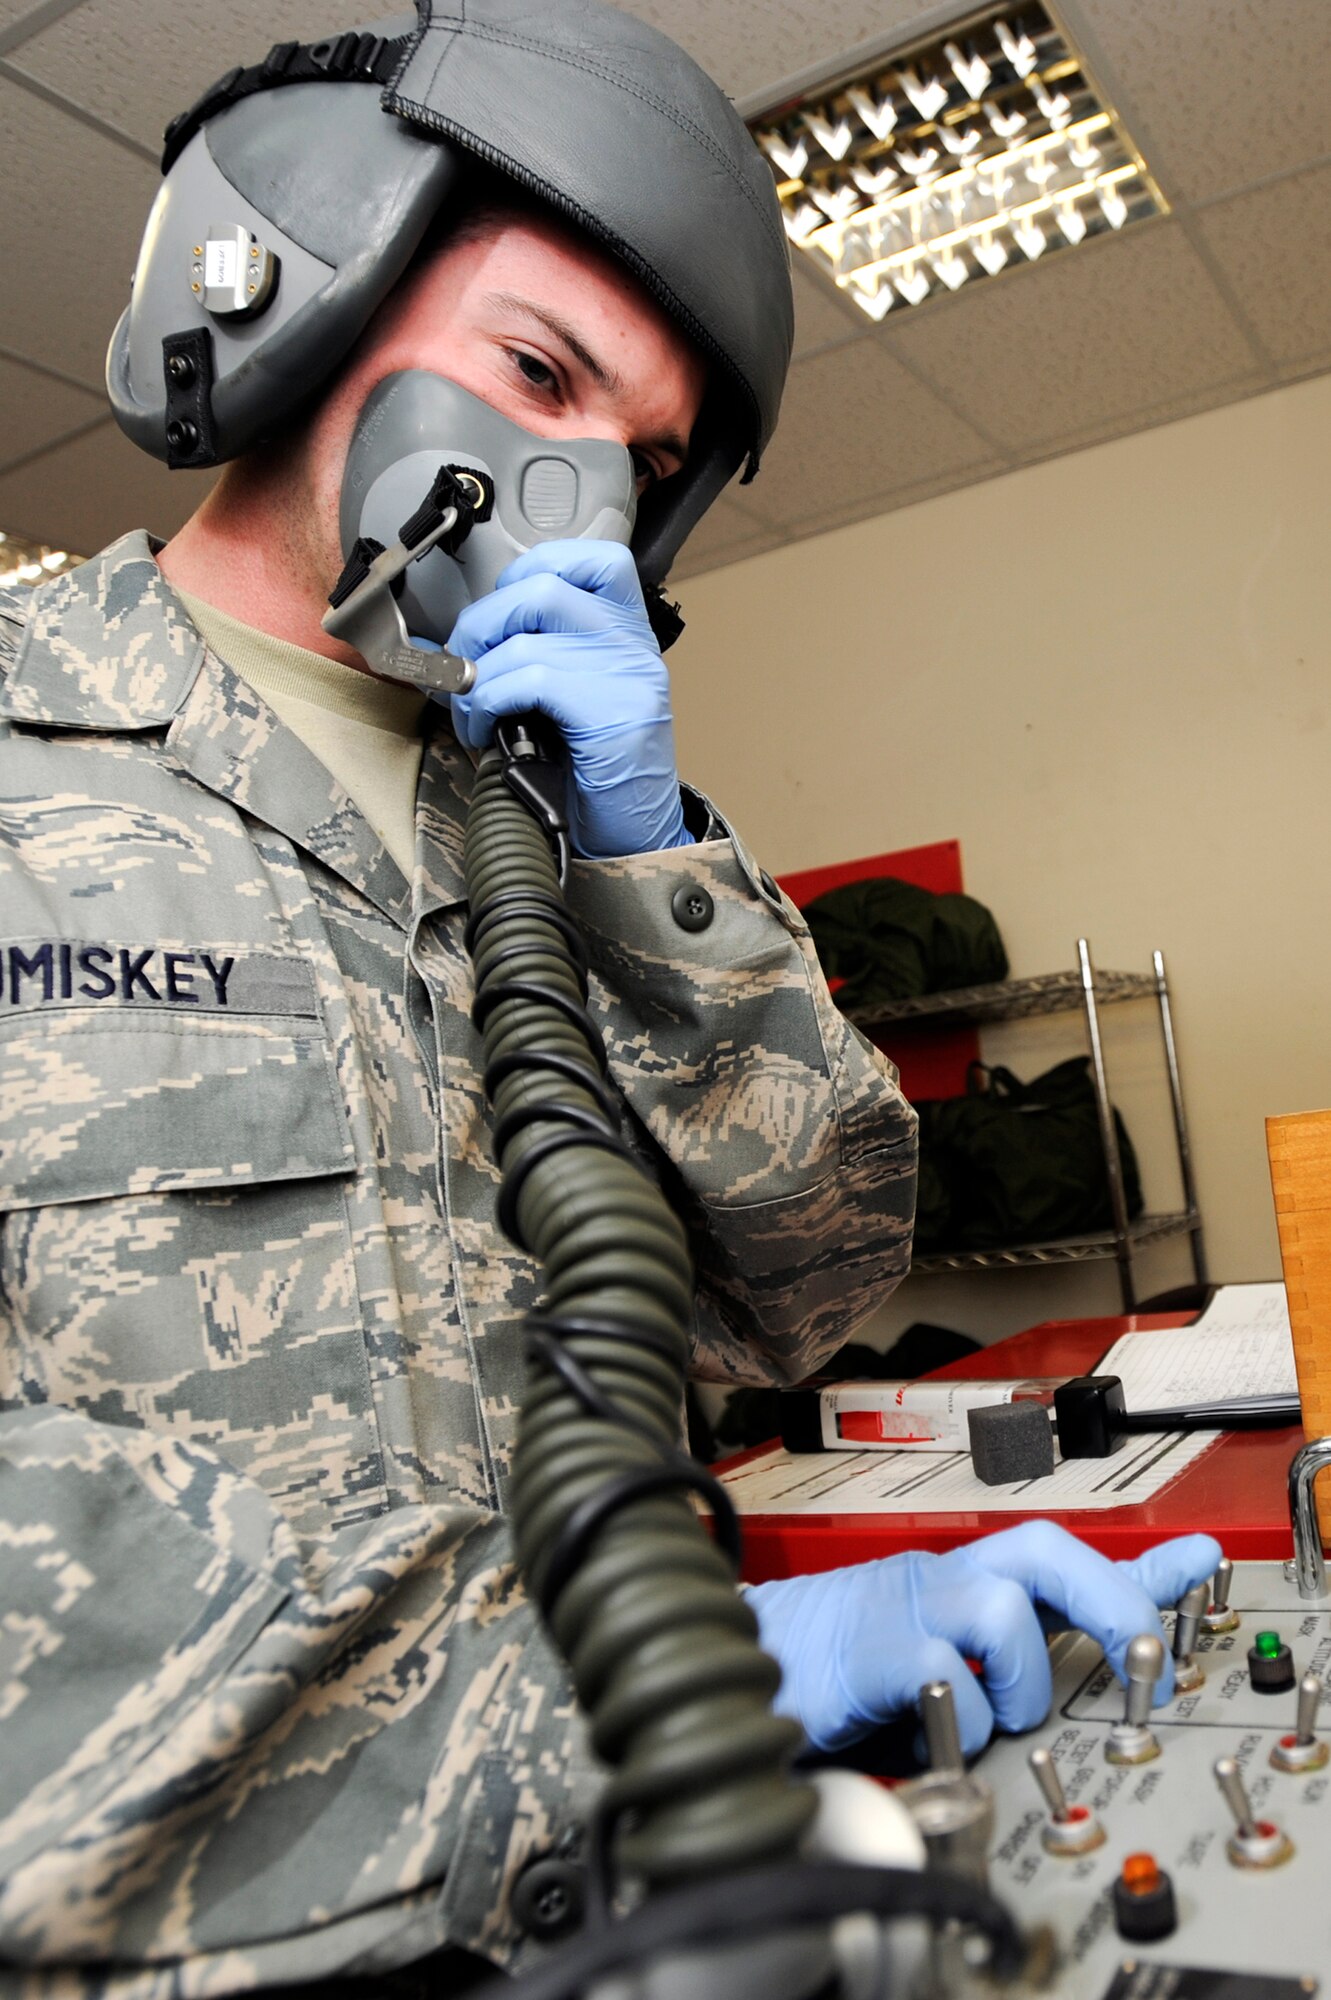 Senior Airman John Cumiskey, an aircrew flight equipment technician with the 379th Expeditionary Operations Support Squadron, checks an MBU 12/P Mask with an oxygen mask test unit for serviceability, Feb. 10, 2009, in an undisclosed location in Southwest Asia.  The test unit ensures oxygen will flow properly to the crew member and the seal on the mask is good. Airman Cumiskey is native to Fairfield, Conn. and deployed from Offutt Air Force Base, Neb. in support of Operations Iraqi and Enduring Freedom and Combined Joint Task Force - Horn of Africa. (U.S. Air Force Photo by Staff Sgt. Joshua Garcia/released)